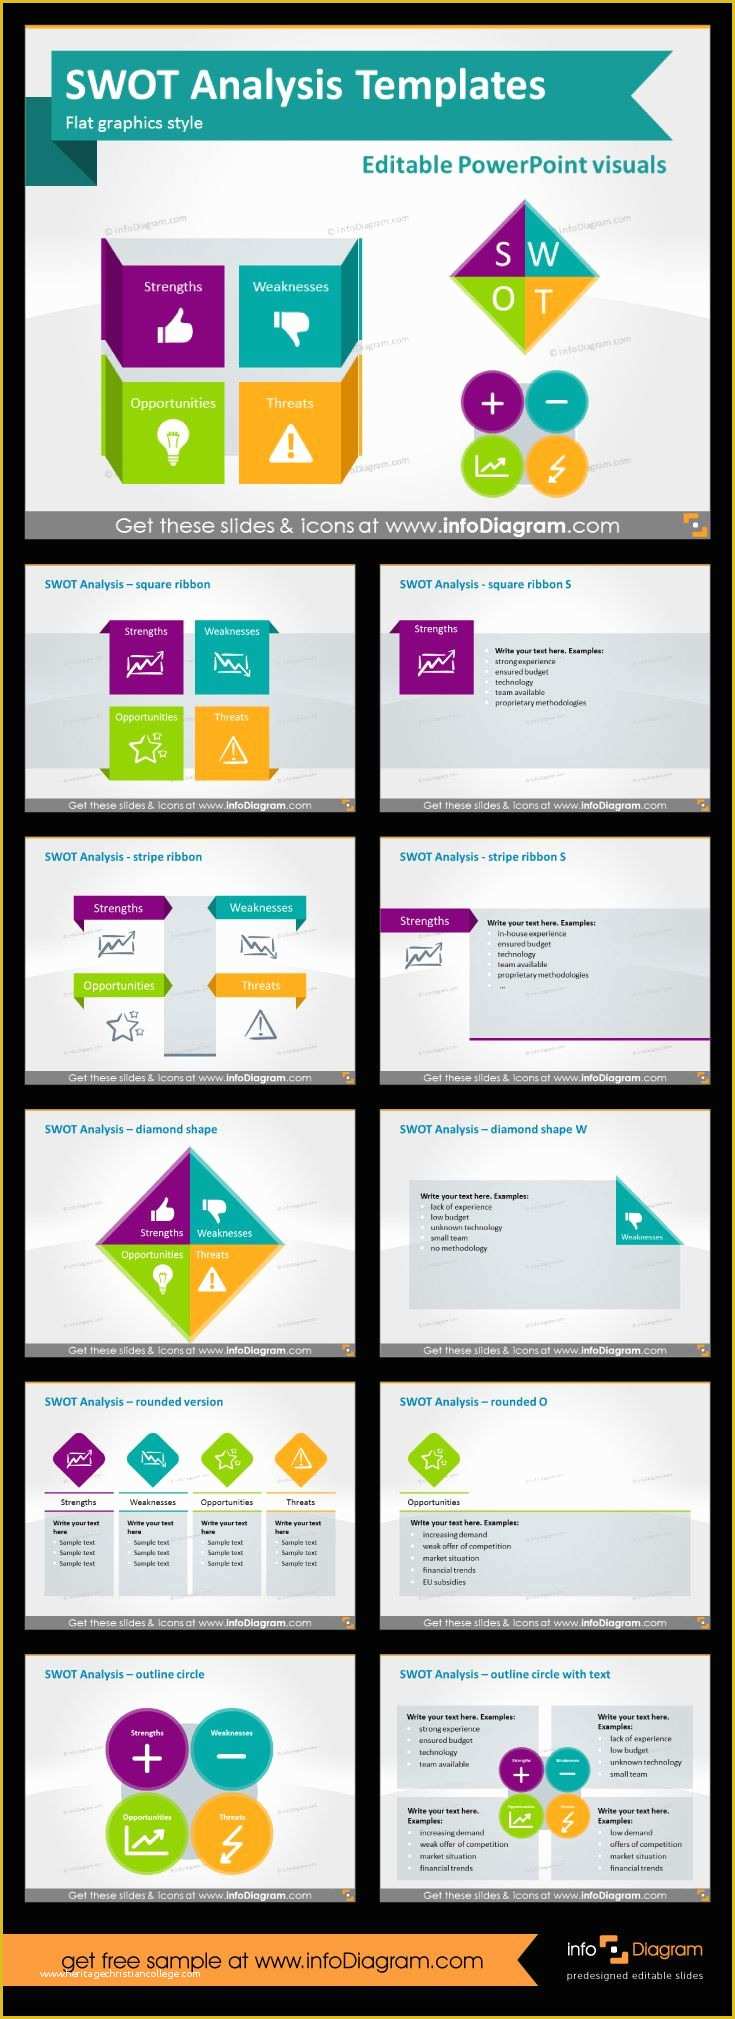 Swot Analysis Template Powerpoint Free Of Best 10 Swot Analysis Ideas On Pinterest